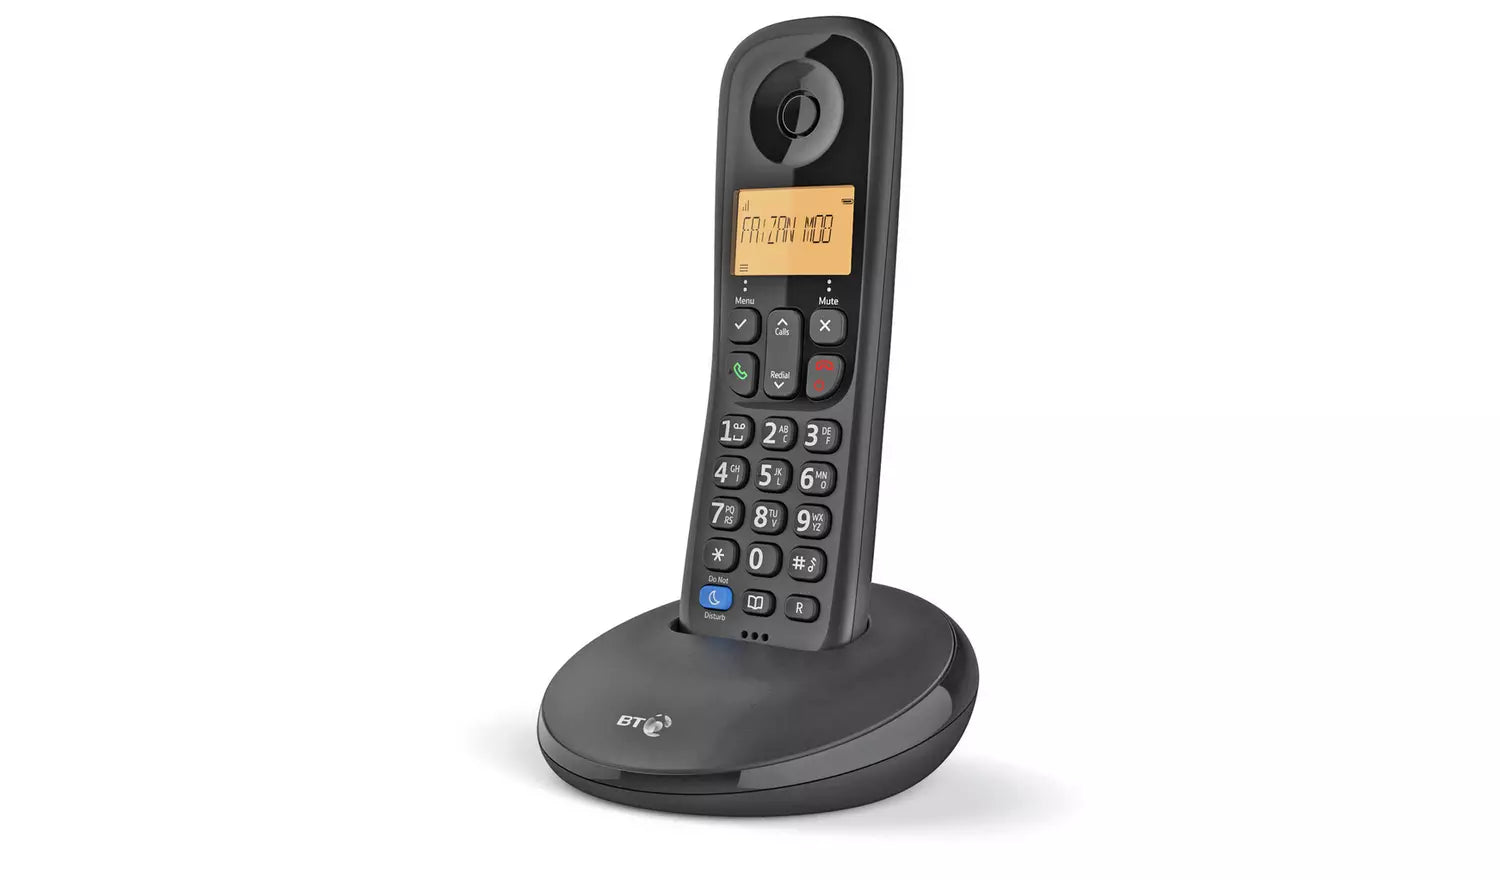 BT Everyday Cordless Home Phone with Basic Call Blocking, Single Handset Pack